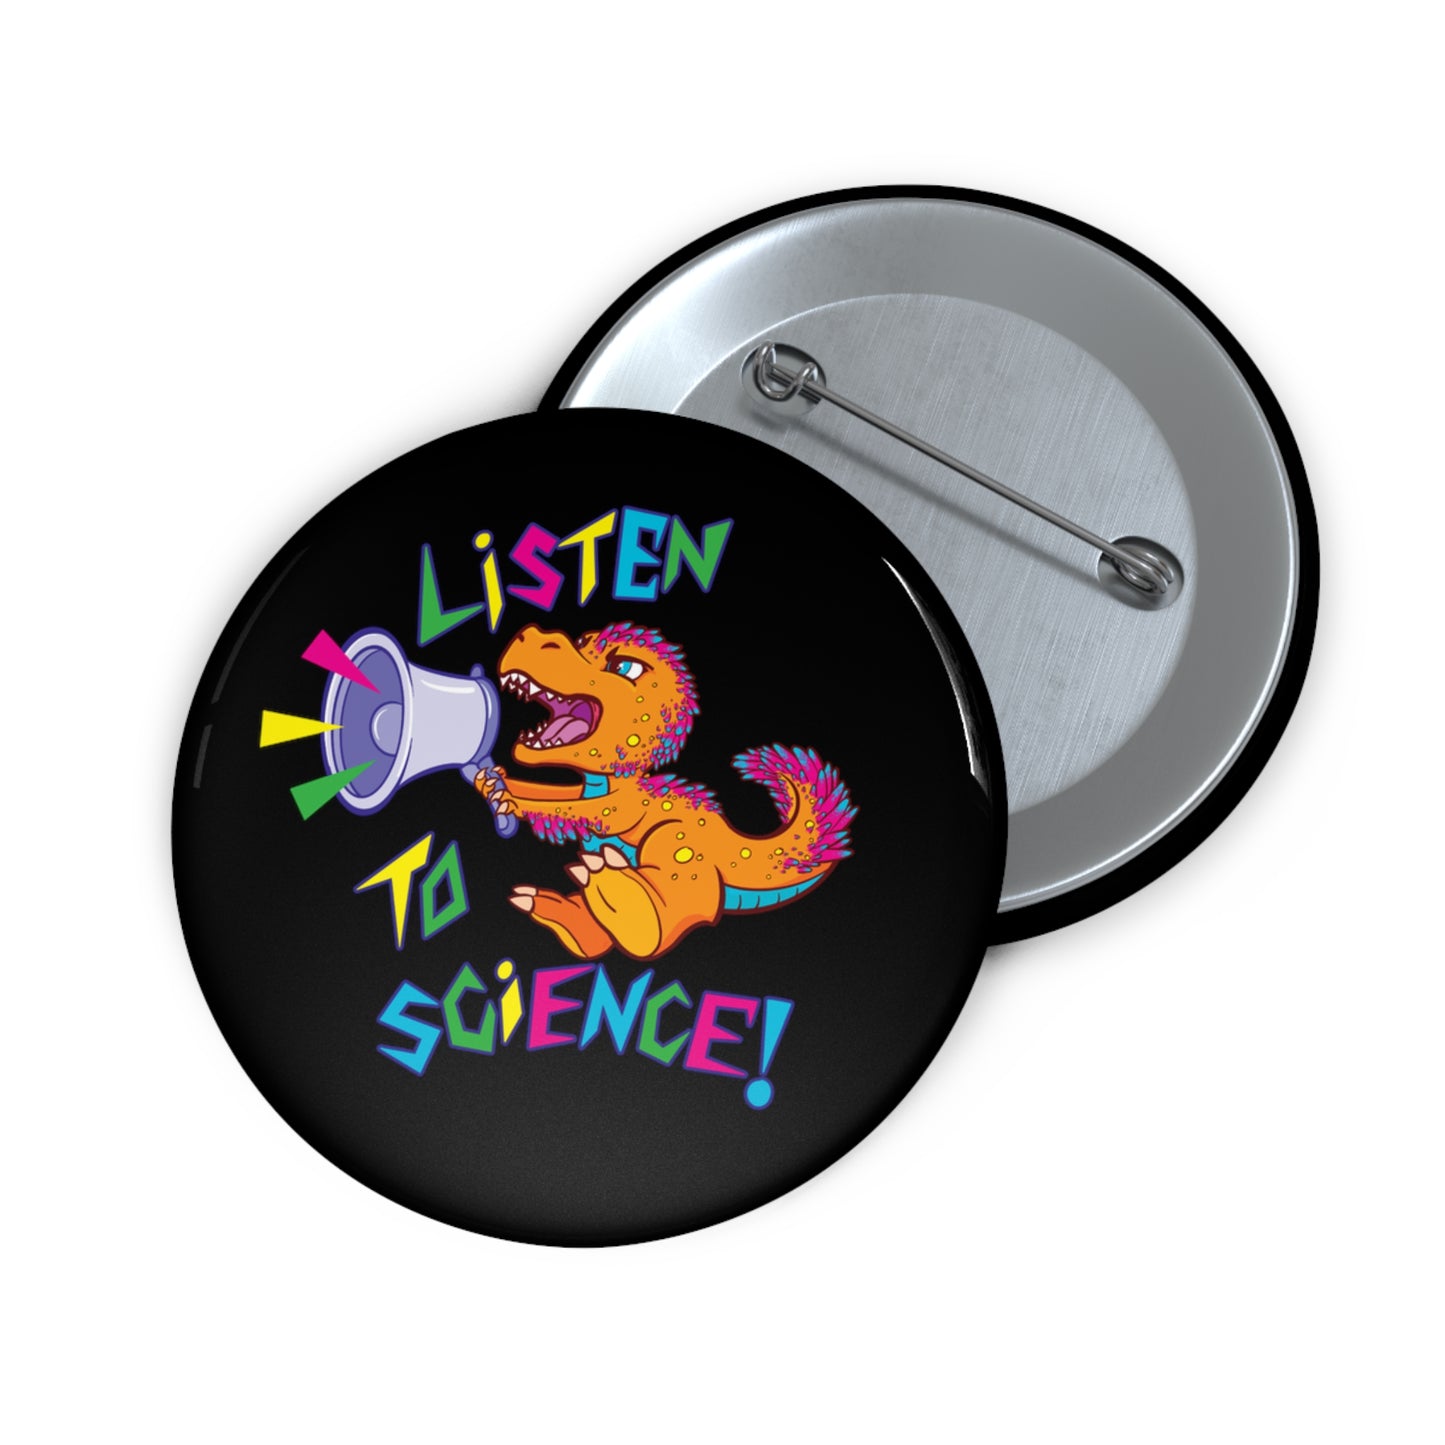 "Science!" Pin Buttons